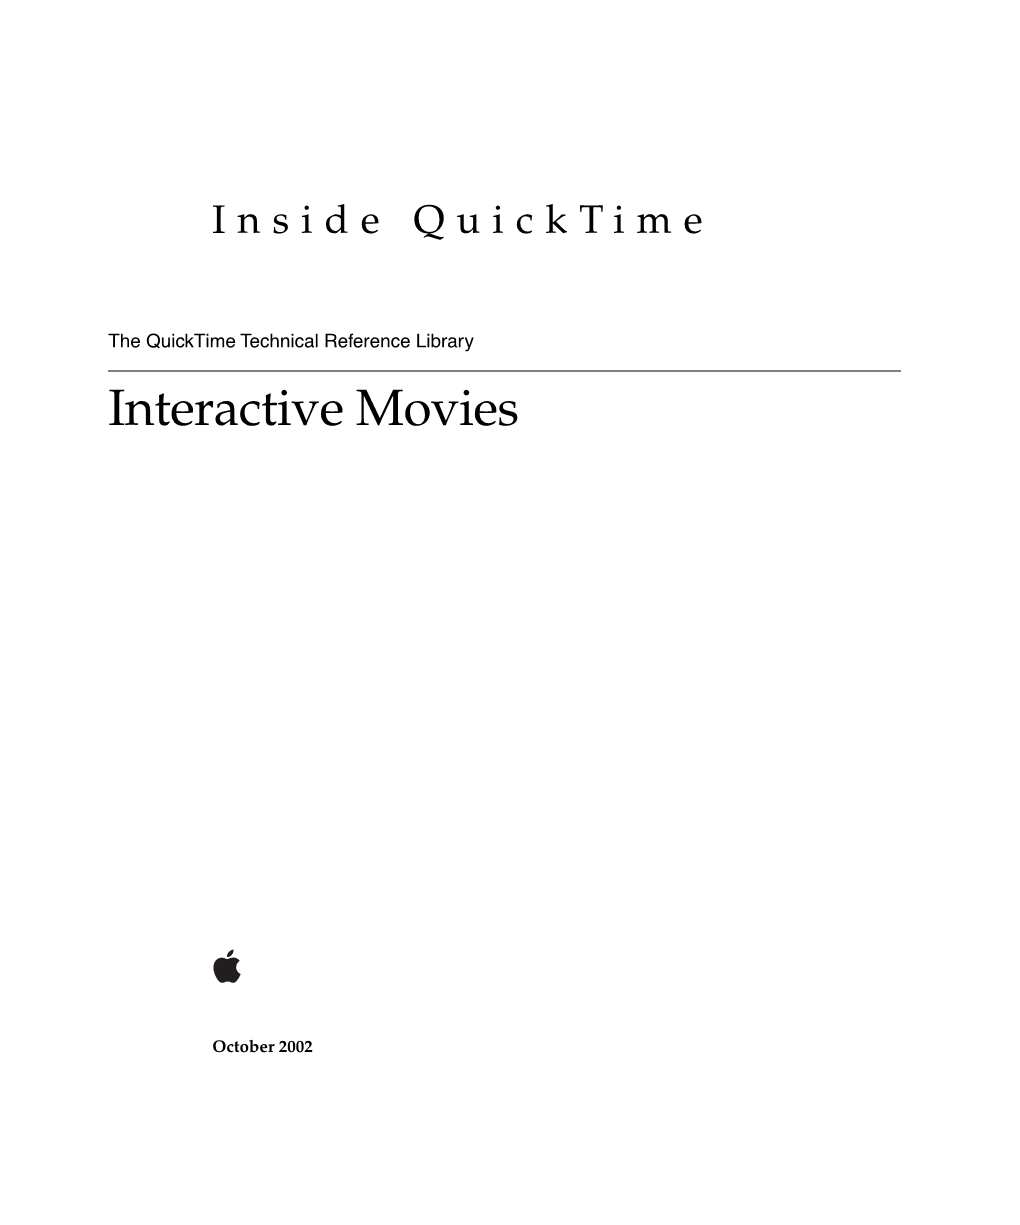 Inside Quicktime: Interactive Movies